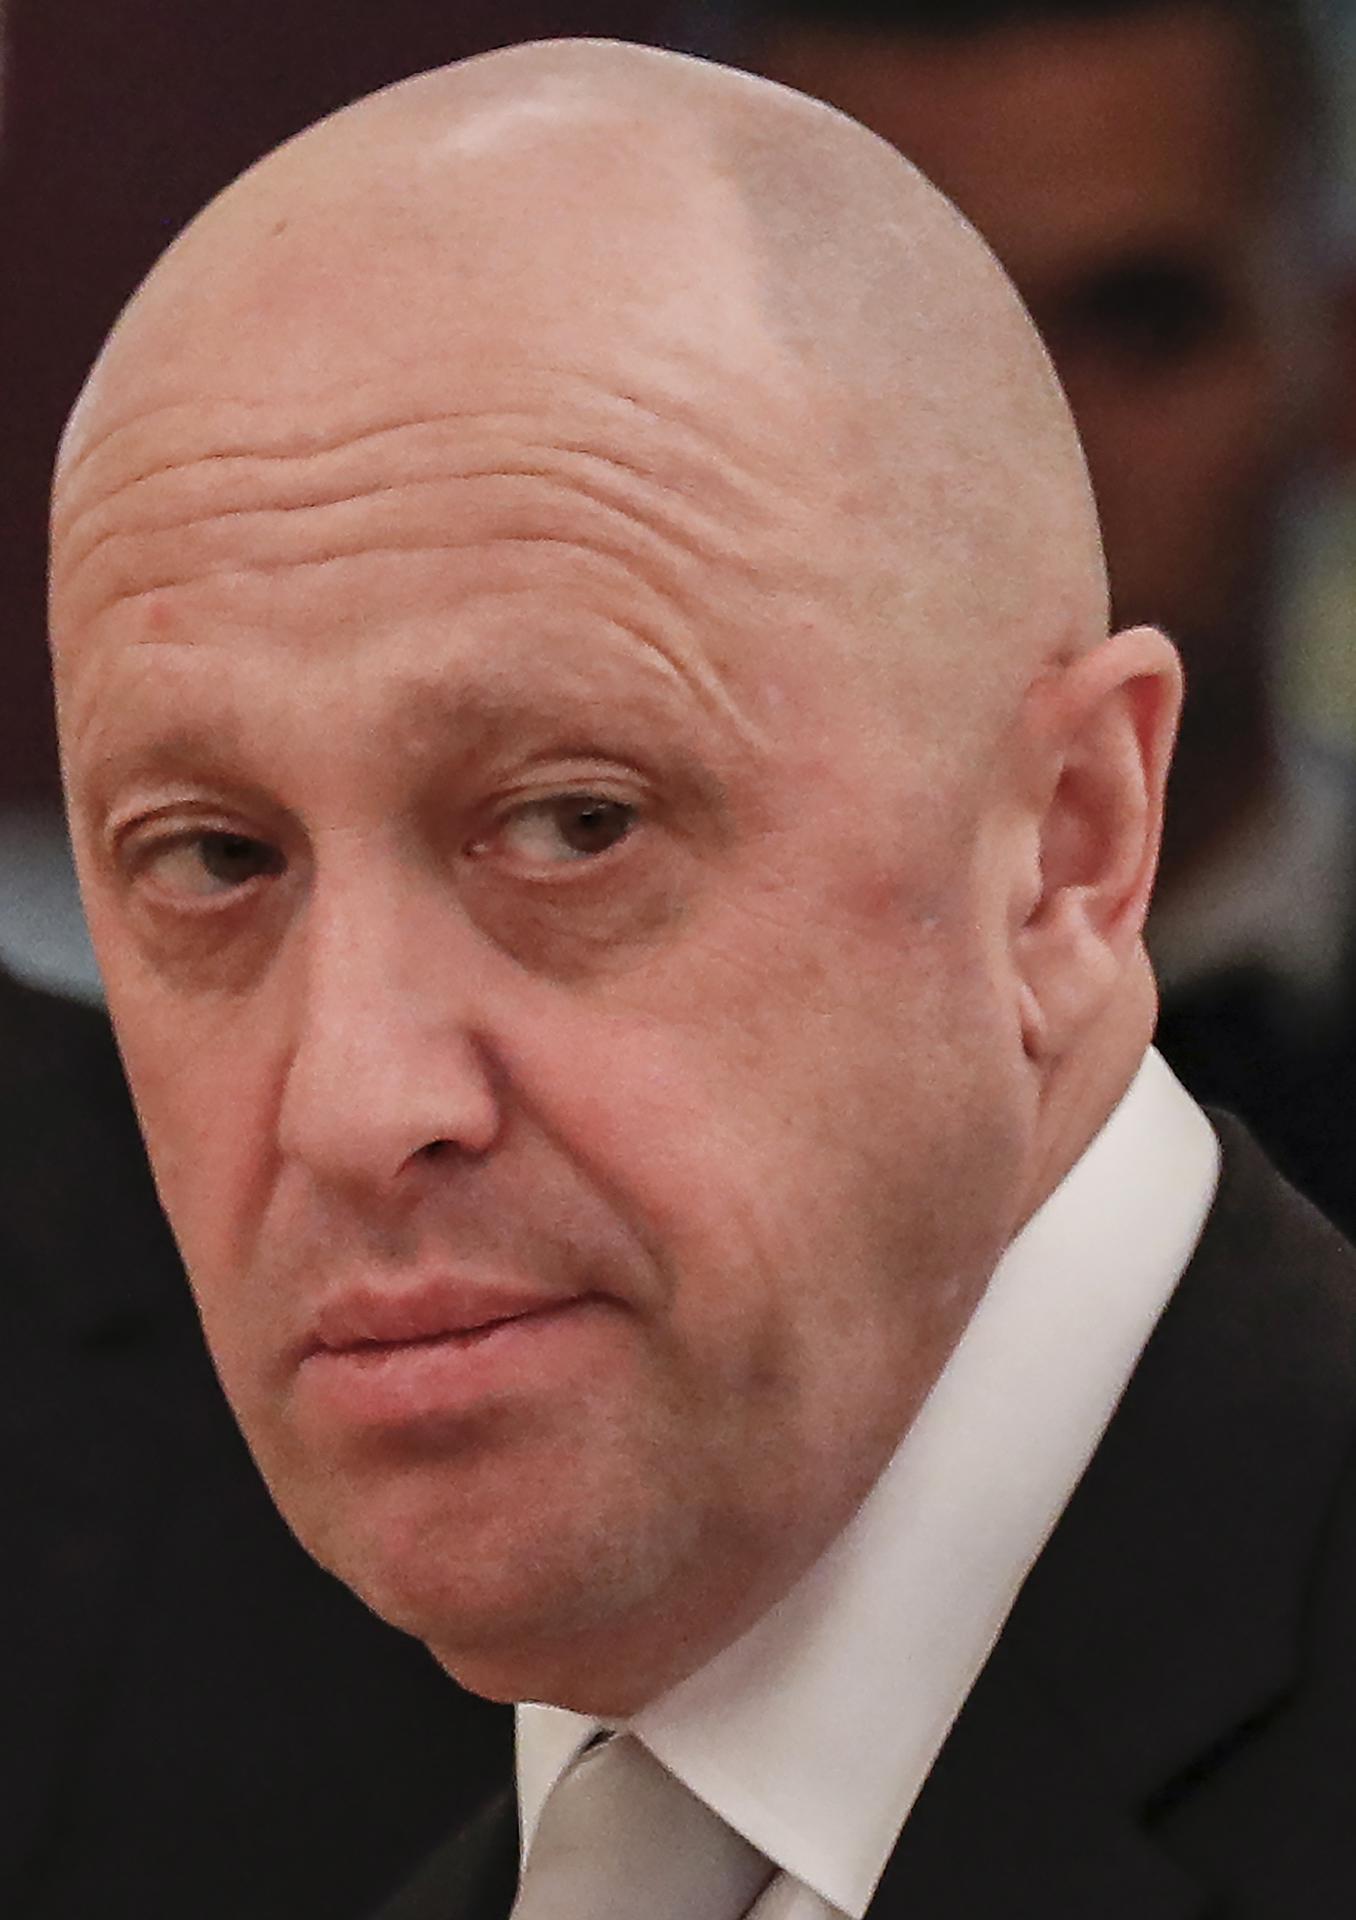 (FILE) Russian businessman Yevgeny Prigozhin prior to a meeting with business leaders at the Kremlin in Moscow, Russia, 04 July 2017 (issued 23 August 2023). EFE/EPA/SERGEI ILNITSKY/POOL